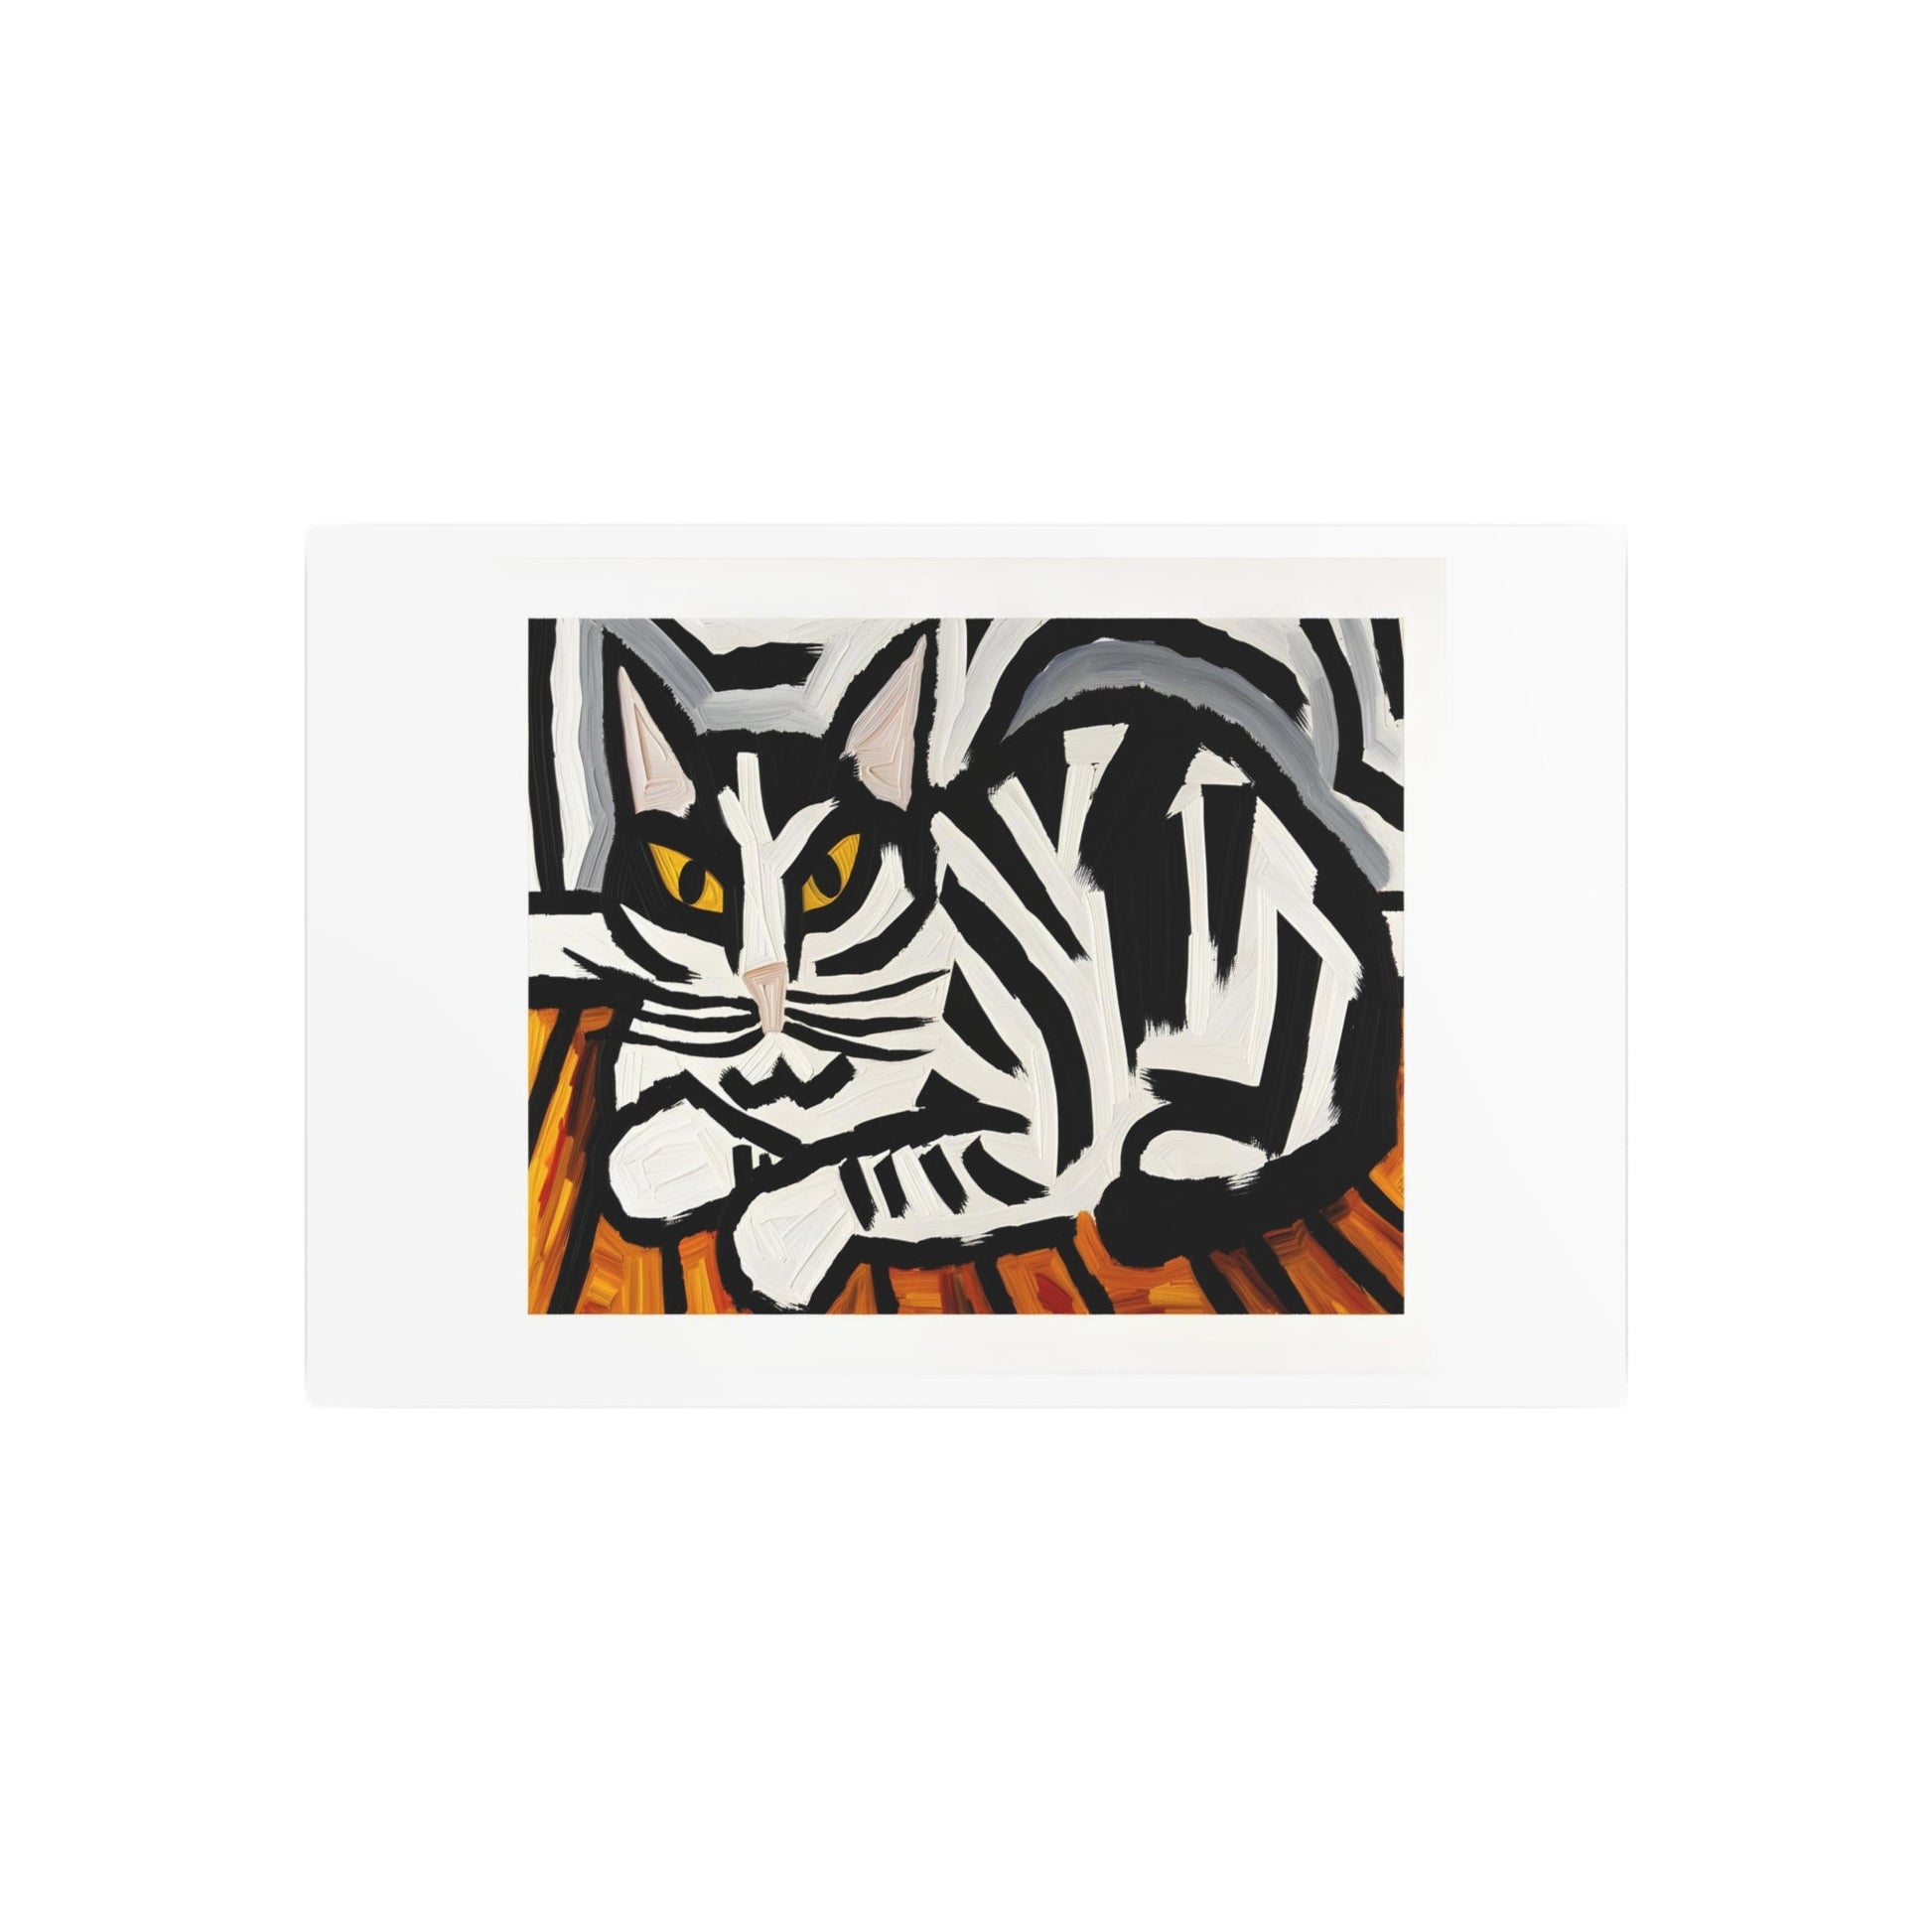 Metal Poster Art | "Expressionist Western Art Style: Emotional Black & White Striped Cat in Bold Distorted Shapes - Abstract Expressionism Artwork" - Metal Poster Art 30″ x 20″ (Horizontal) 0.12''